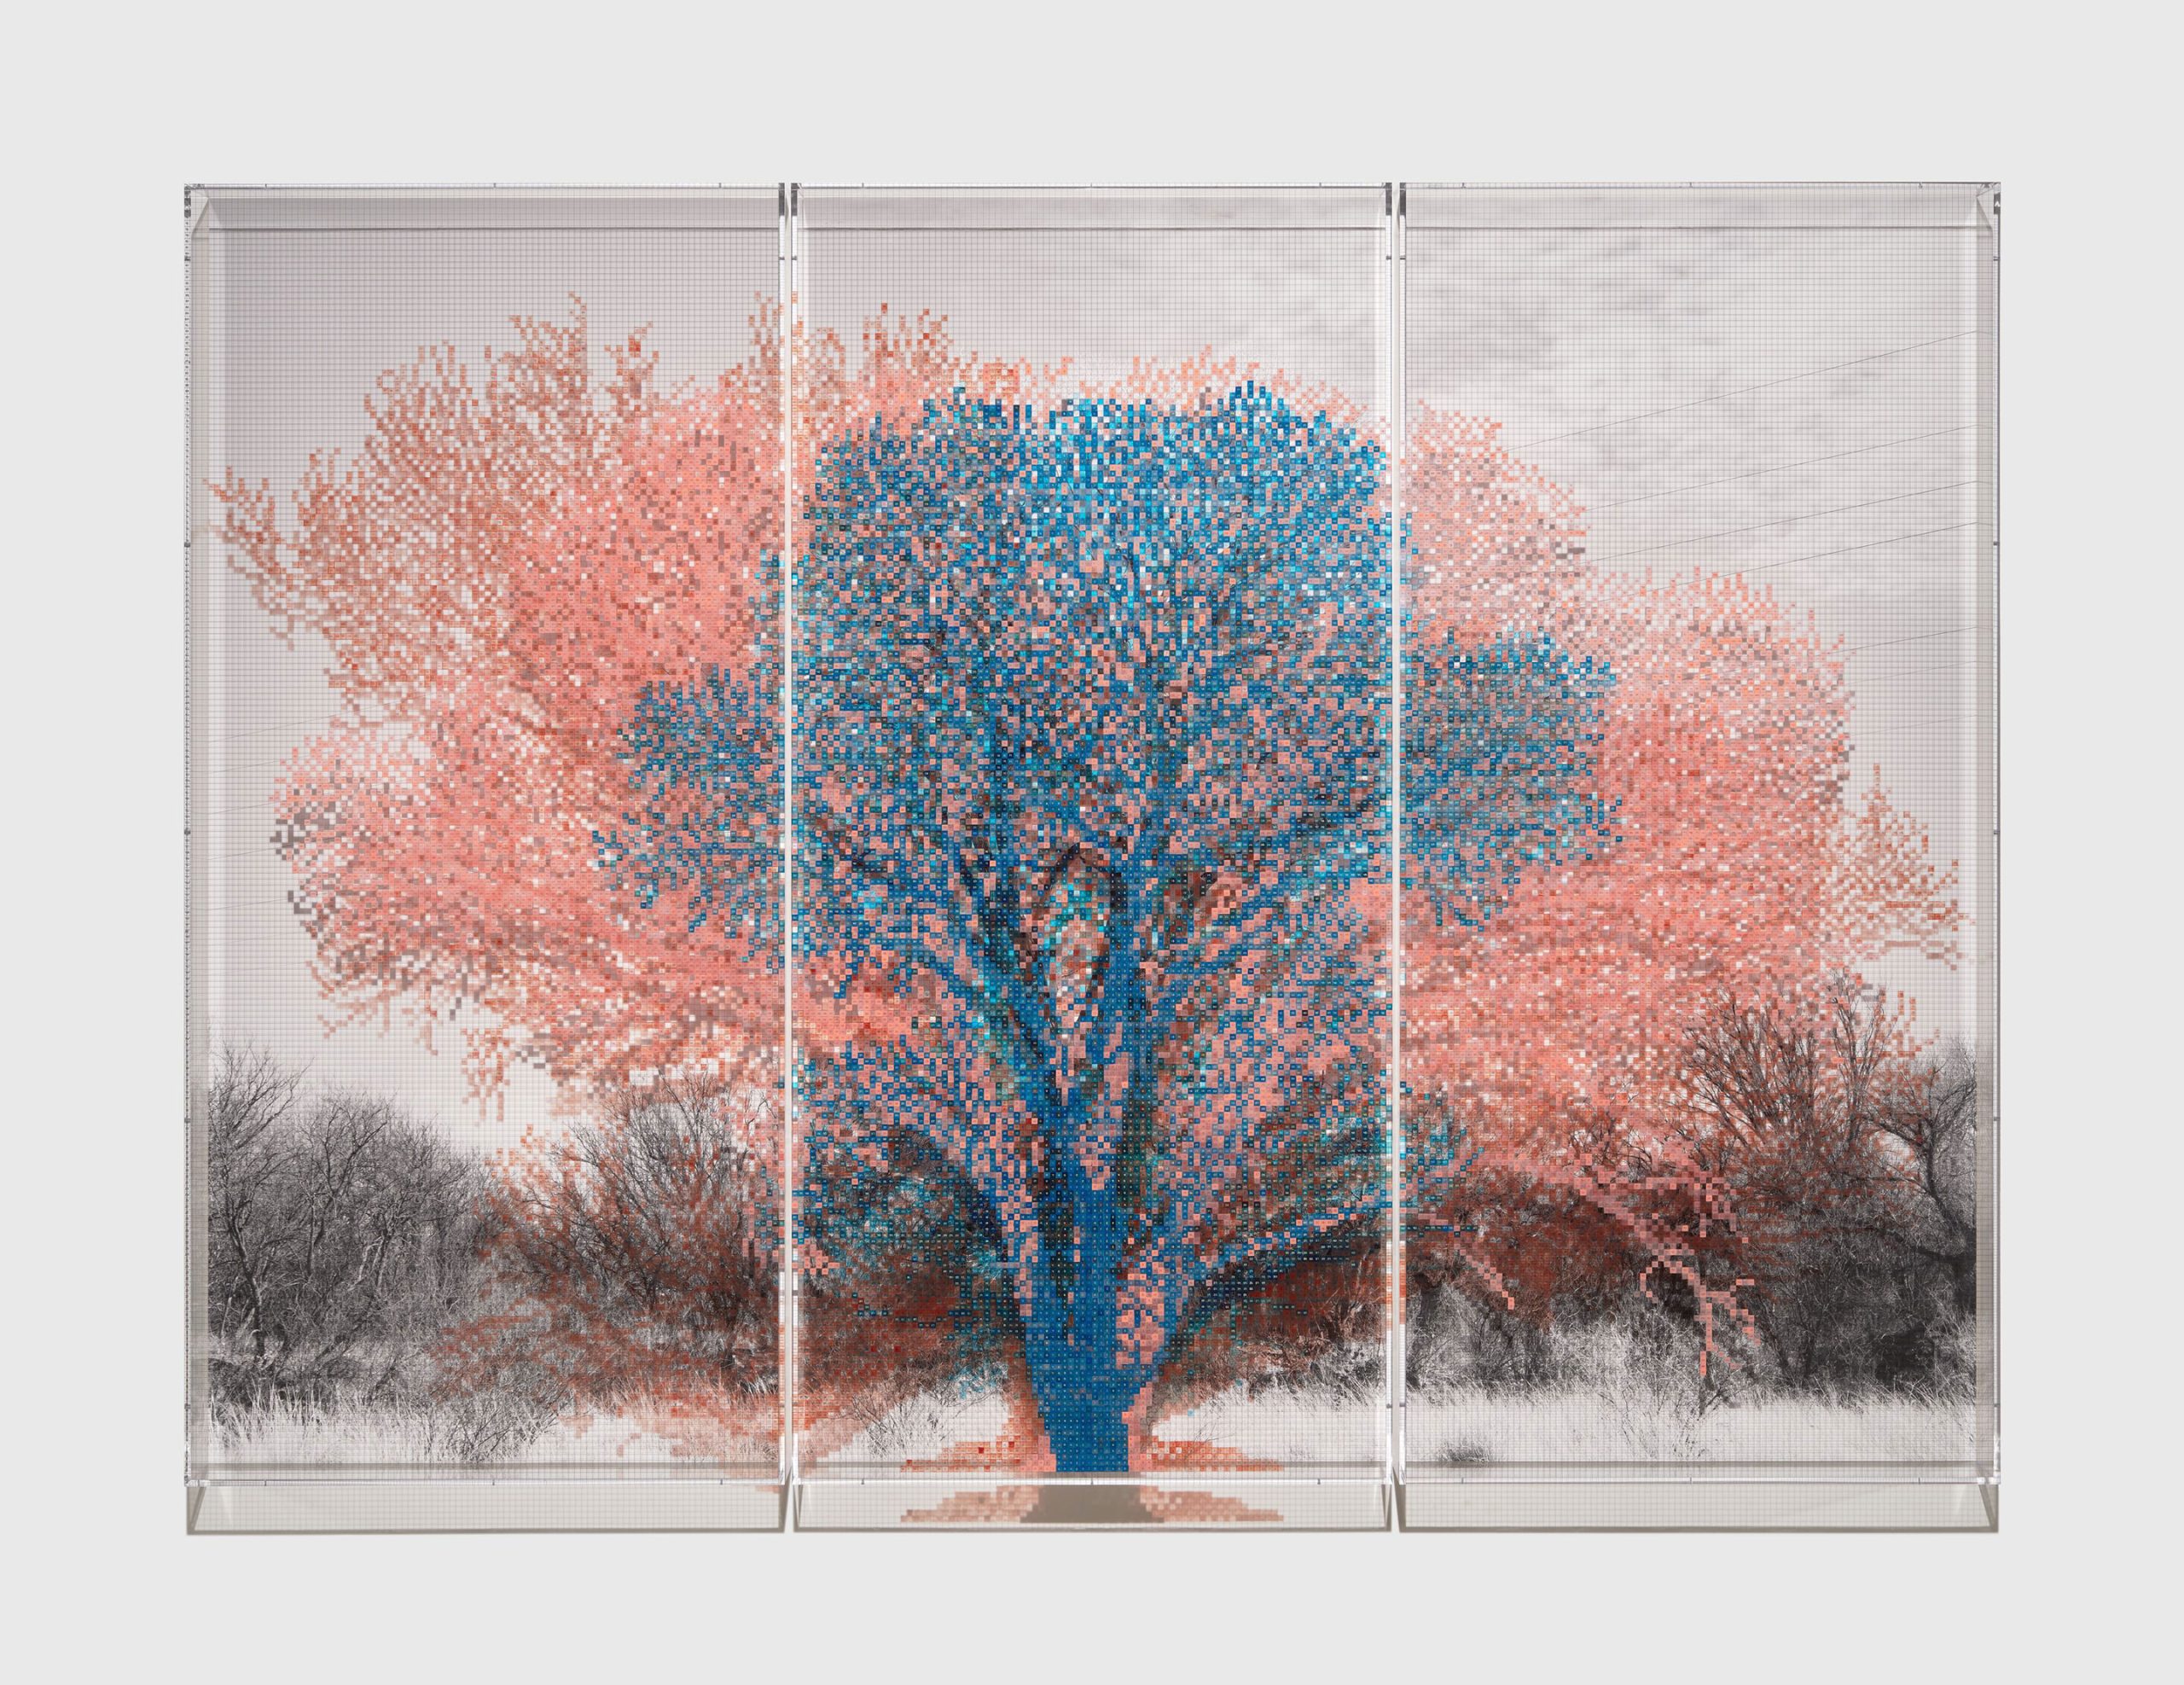 Charles Gaines, Numbers and Trees: Arizona Series 1, Tree #3, Agua Caliente, 2023. Acrylic sheet, acrylic paint, photograph, 3 parts. Unique. Overall: 241.6 x 335.9 x 15.2 cm / 95 1/8 x 132 1/2 x 6 inches. © Charles Gaines. Courtesy the artist and Hauser & Wirth. Photo: Keith Lubow.